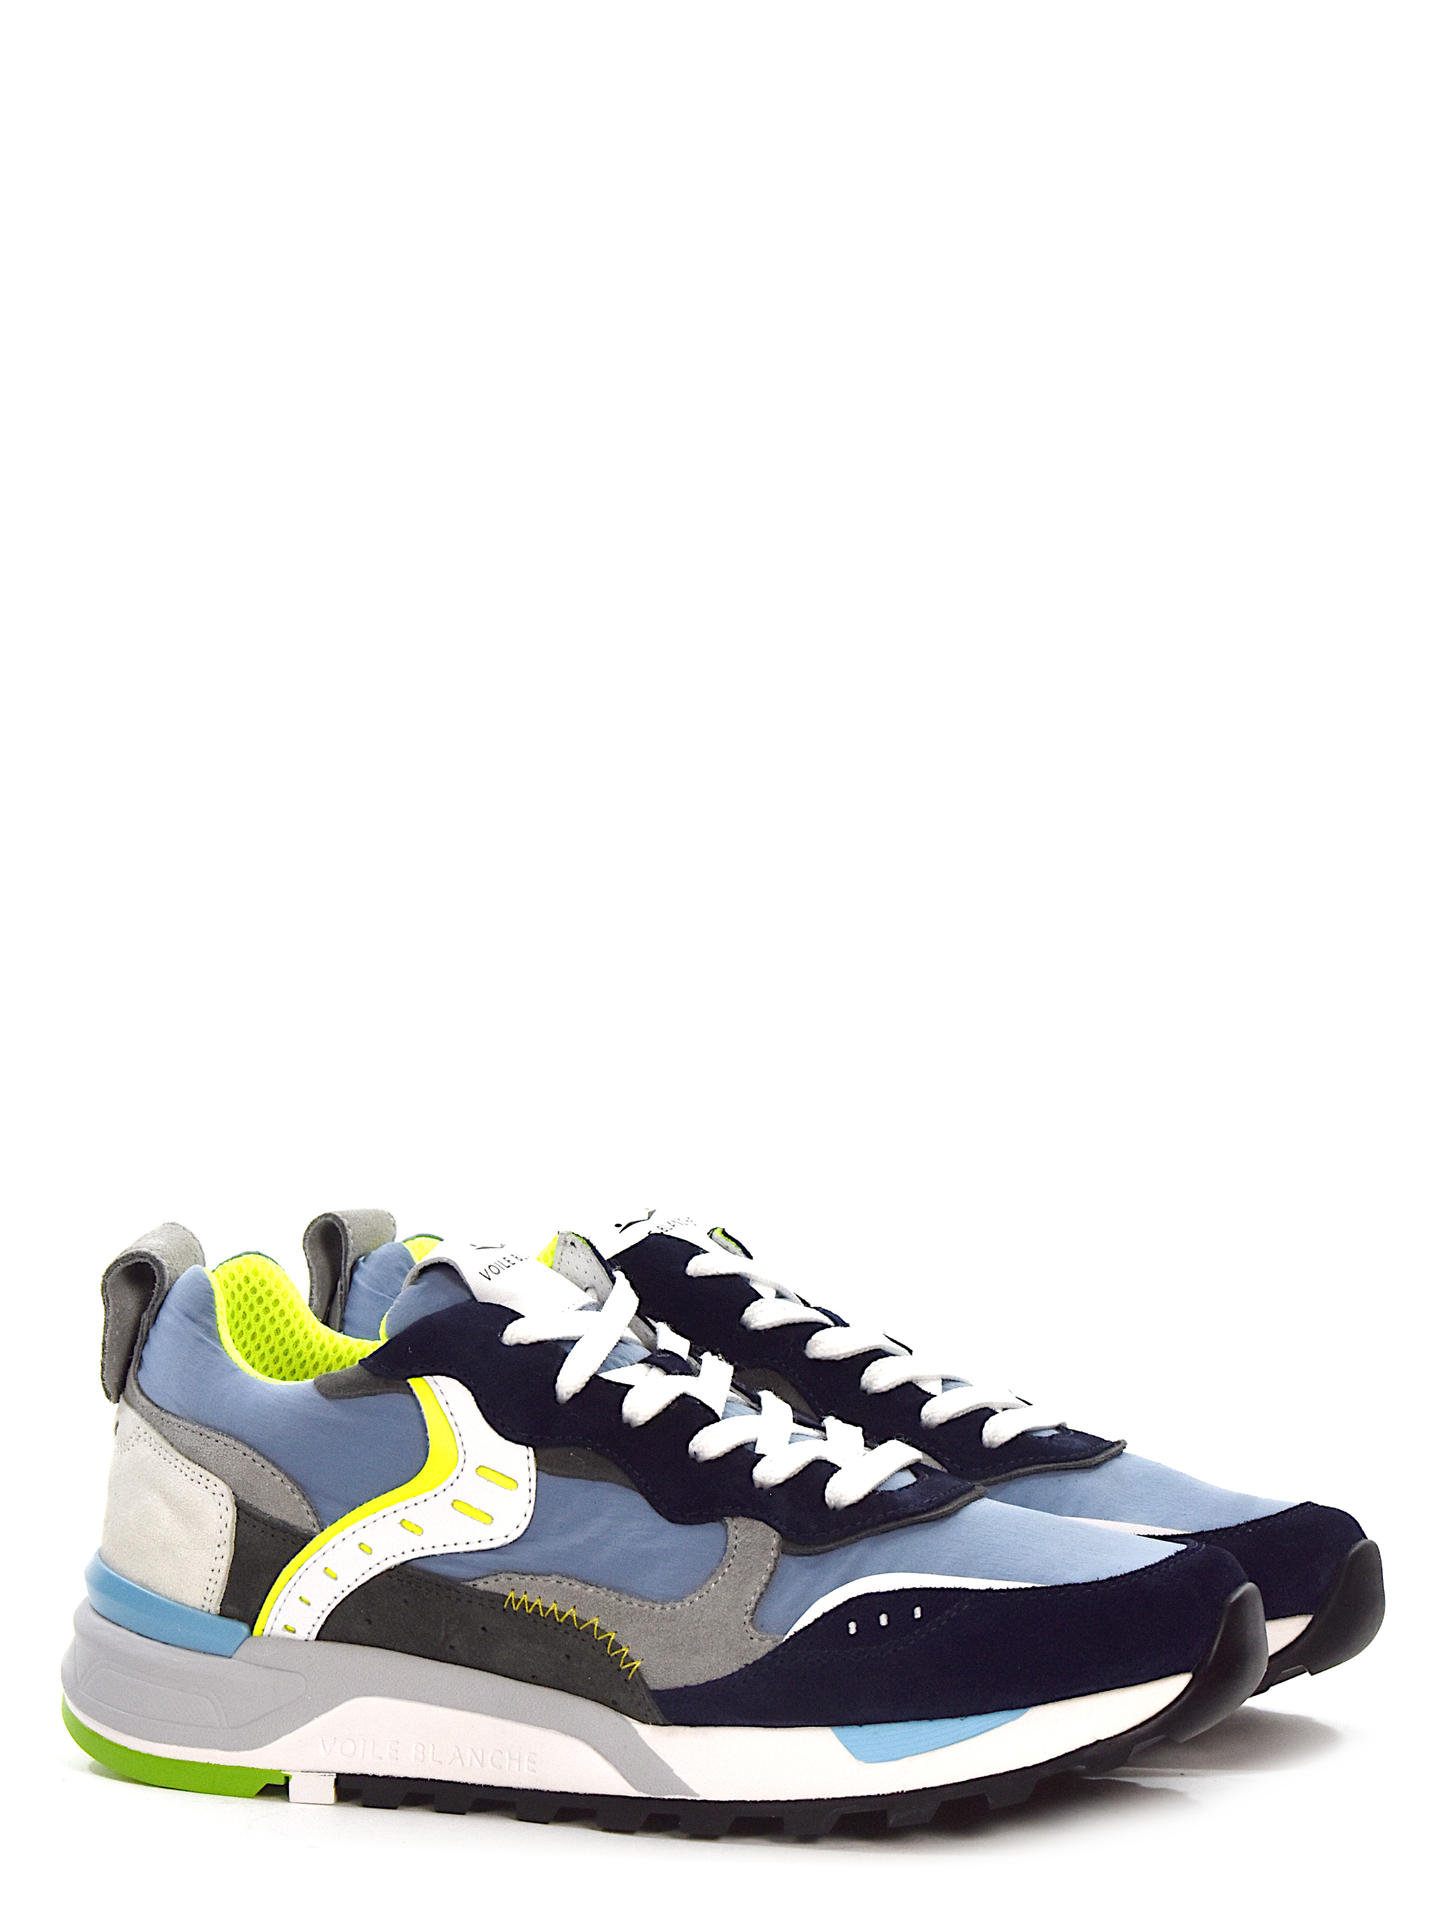 SNEAKERS VOILE BLANCHE 2C60 BLUE